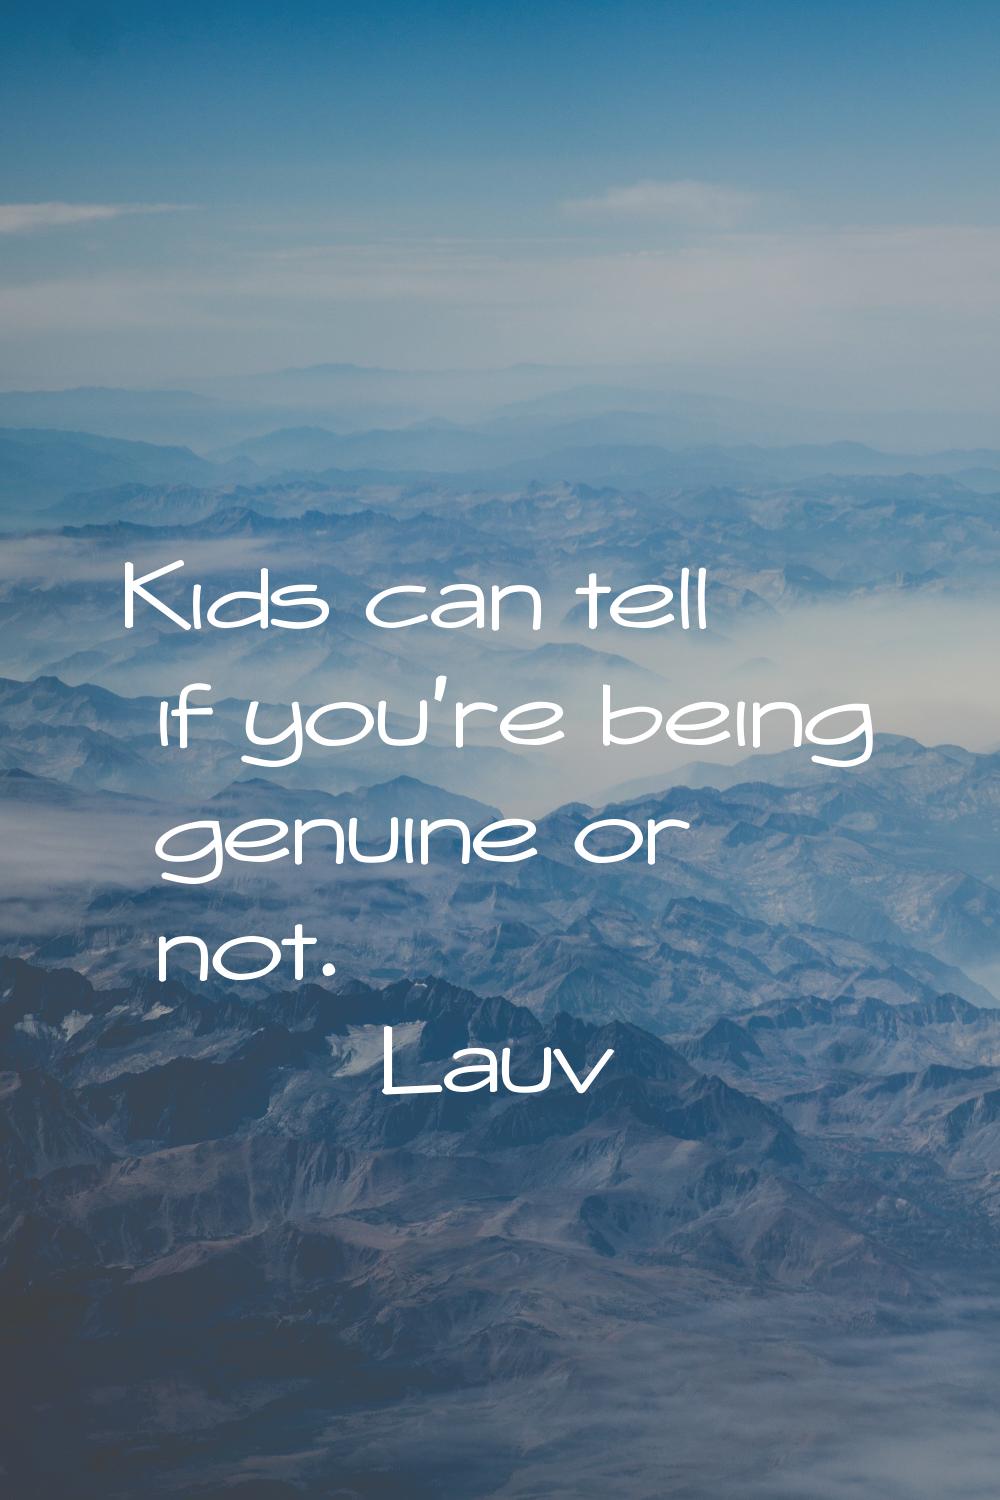 Kids can tell if you're being genuine or not.